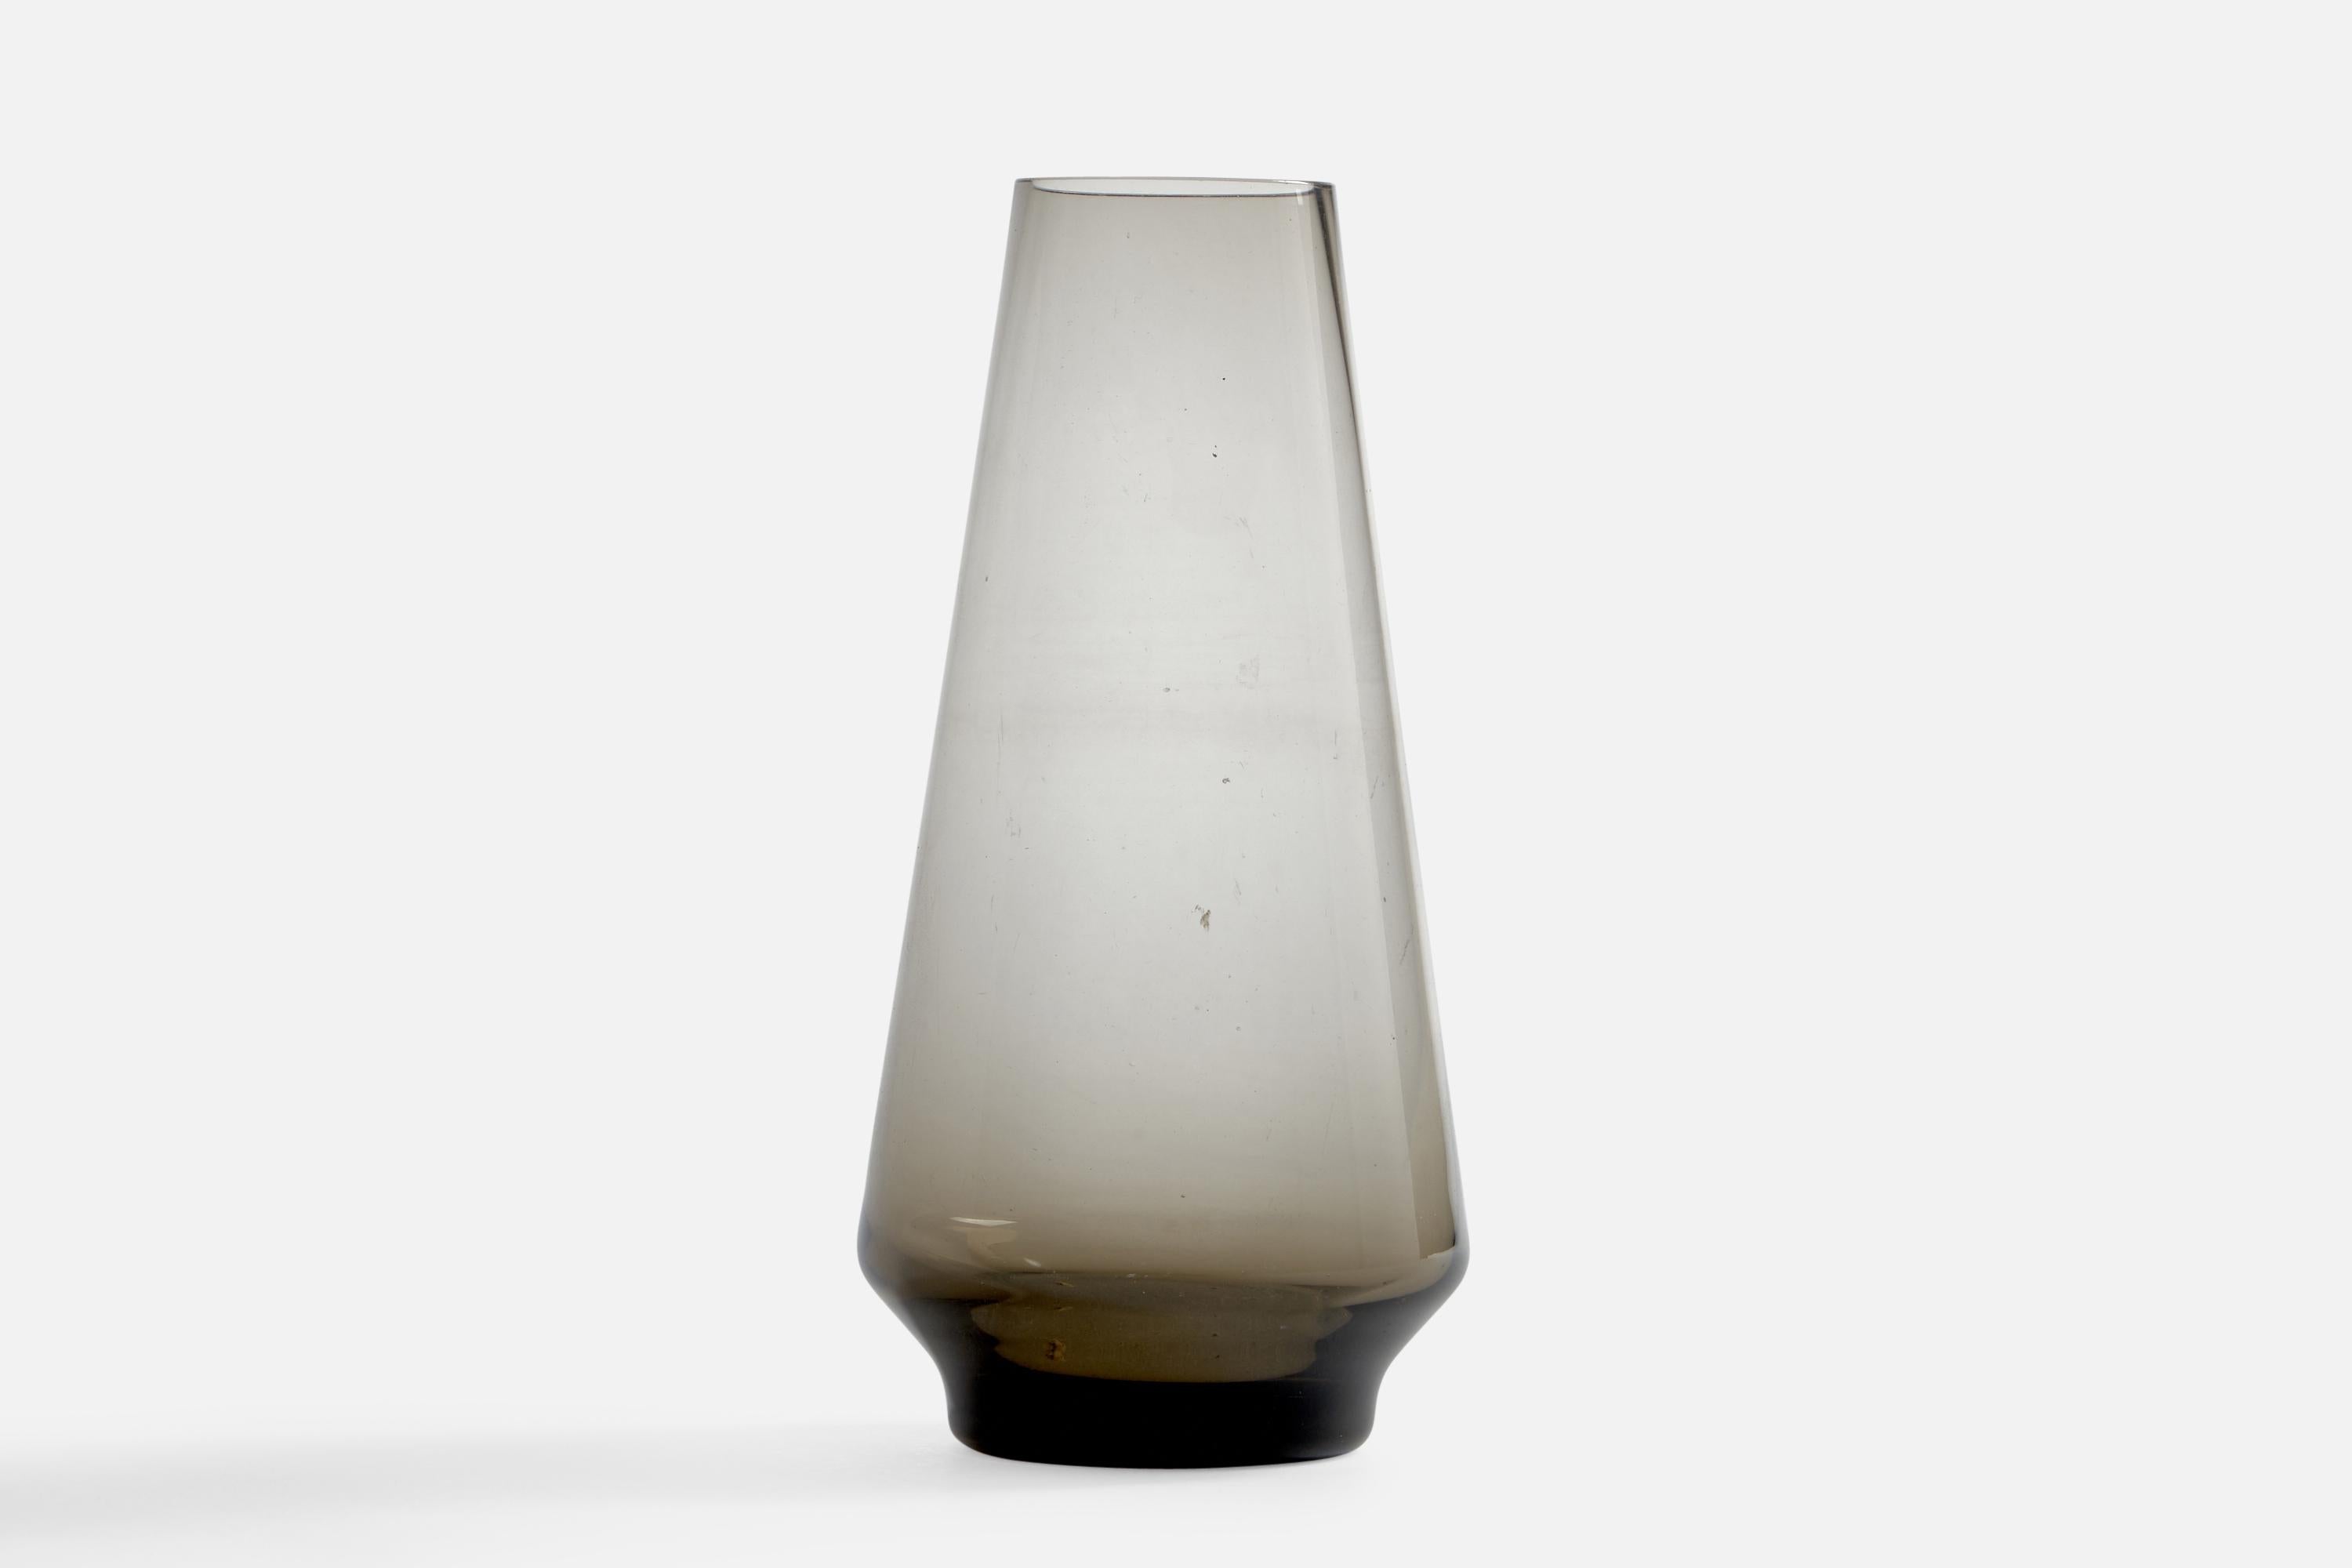 A grey-coloured glass vase designed by Wilhelm Wagenfeld and produced by WMF, Germany, c. 1950s